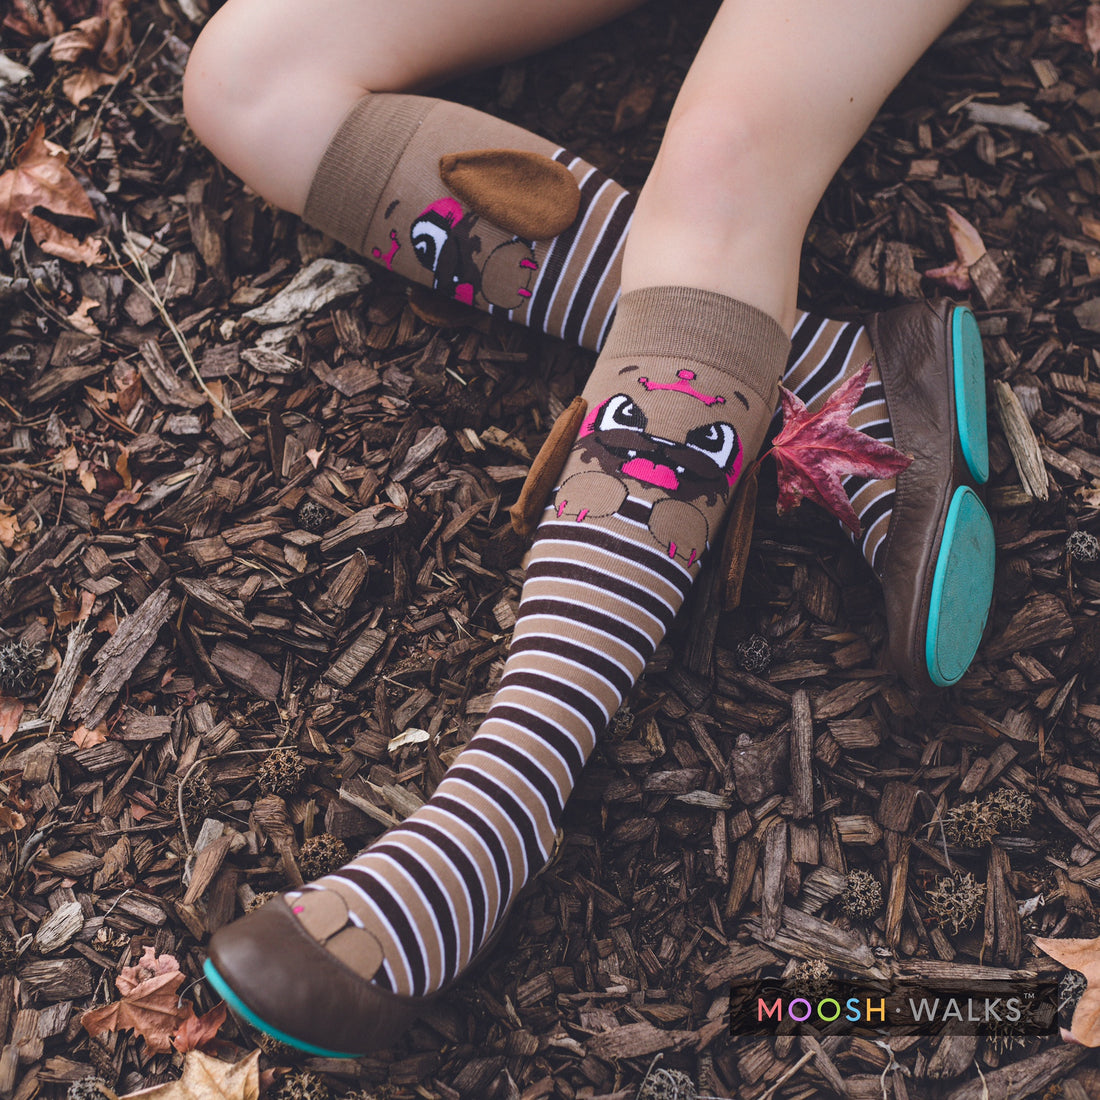 5 Reasons to wear Moosh Walks Socks (With Pictures)